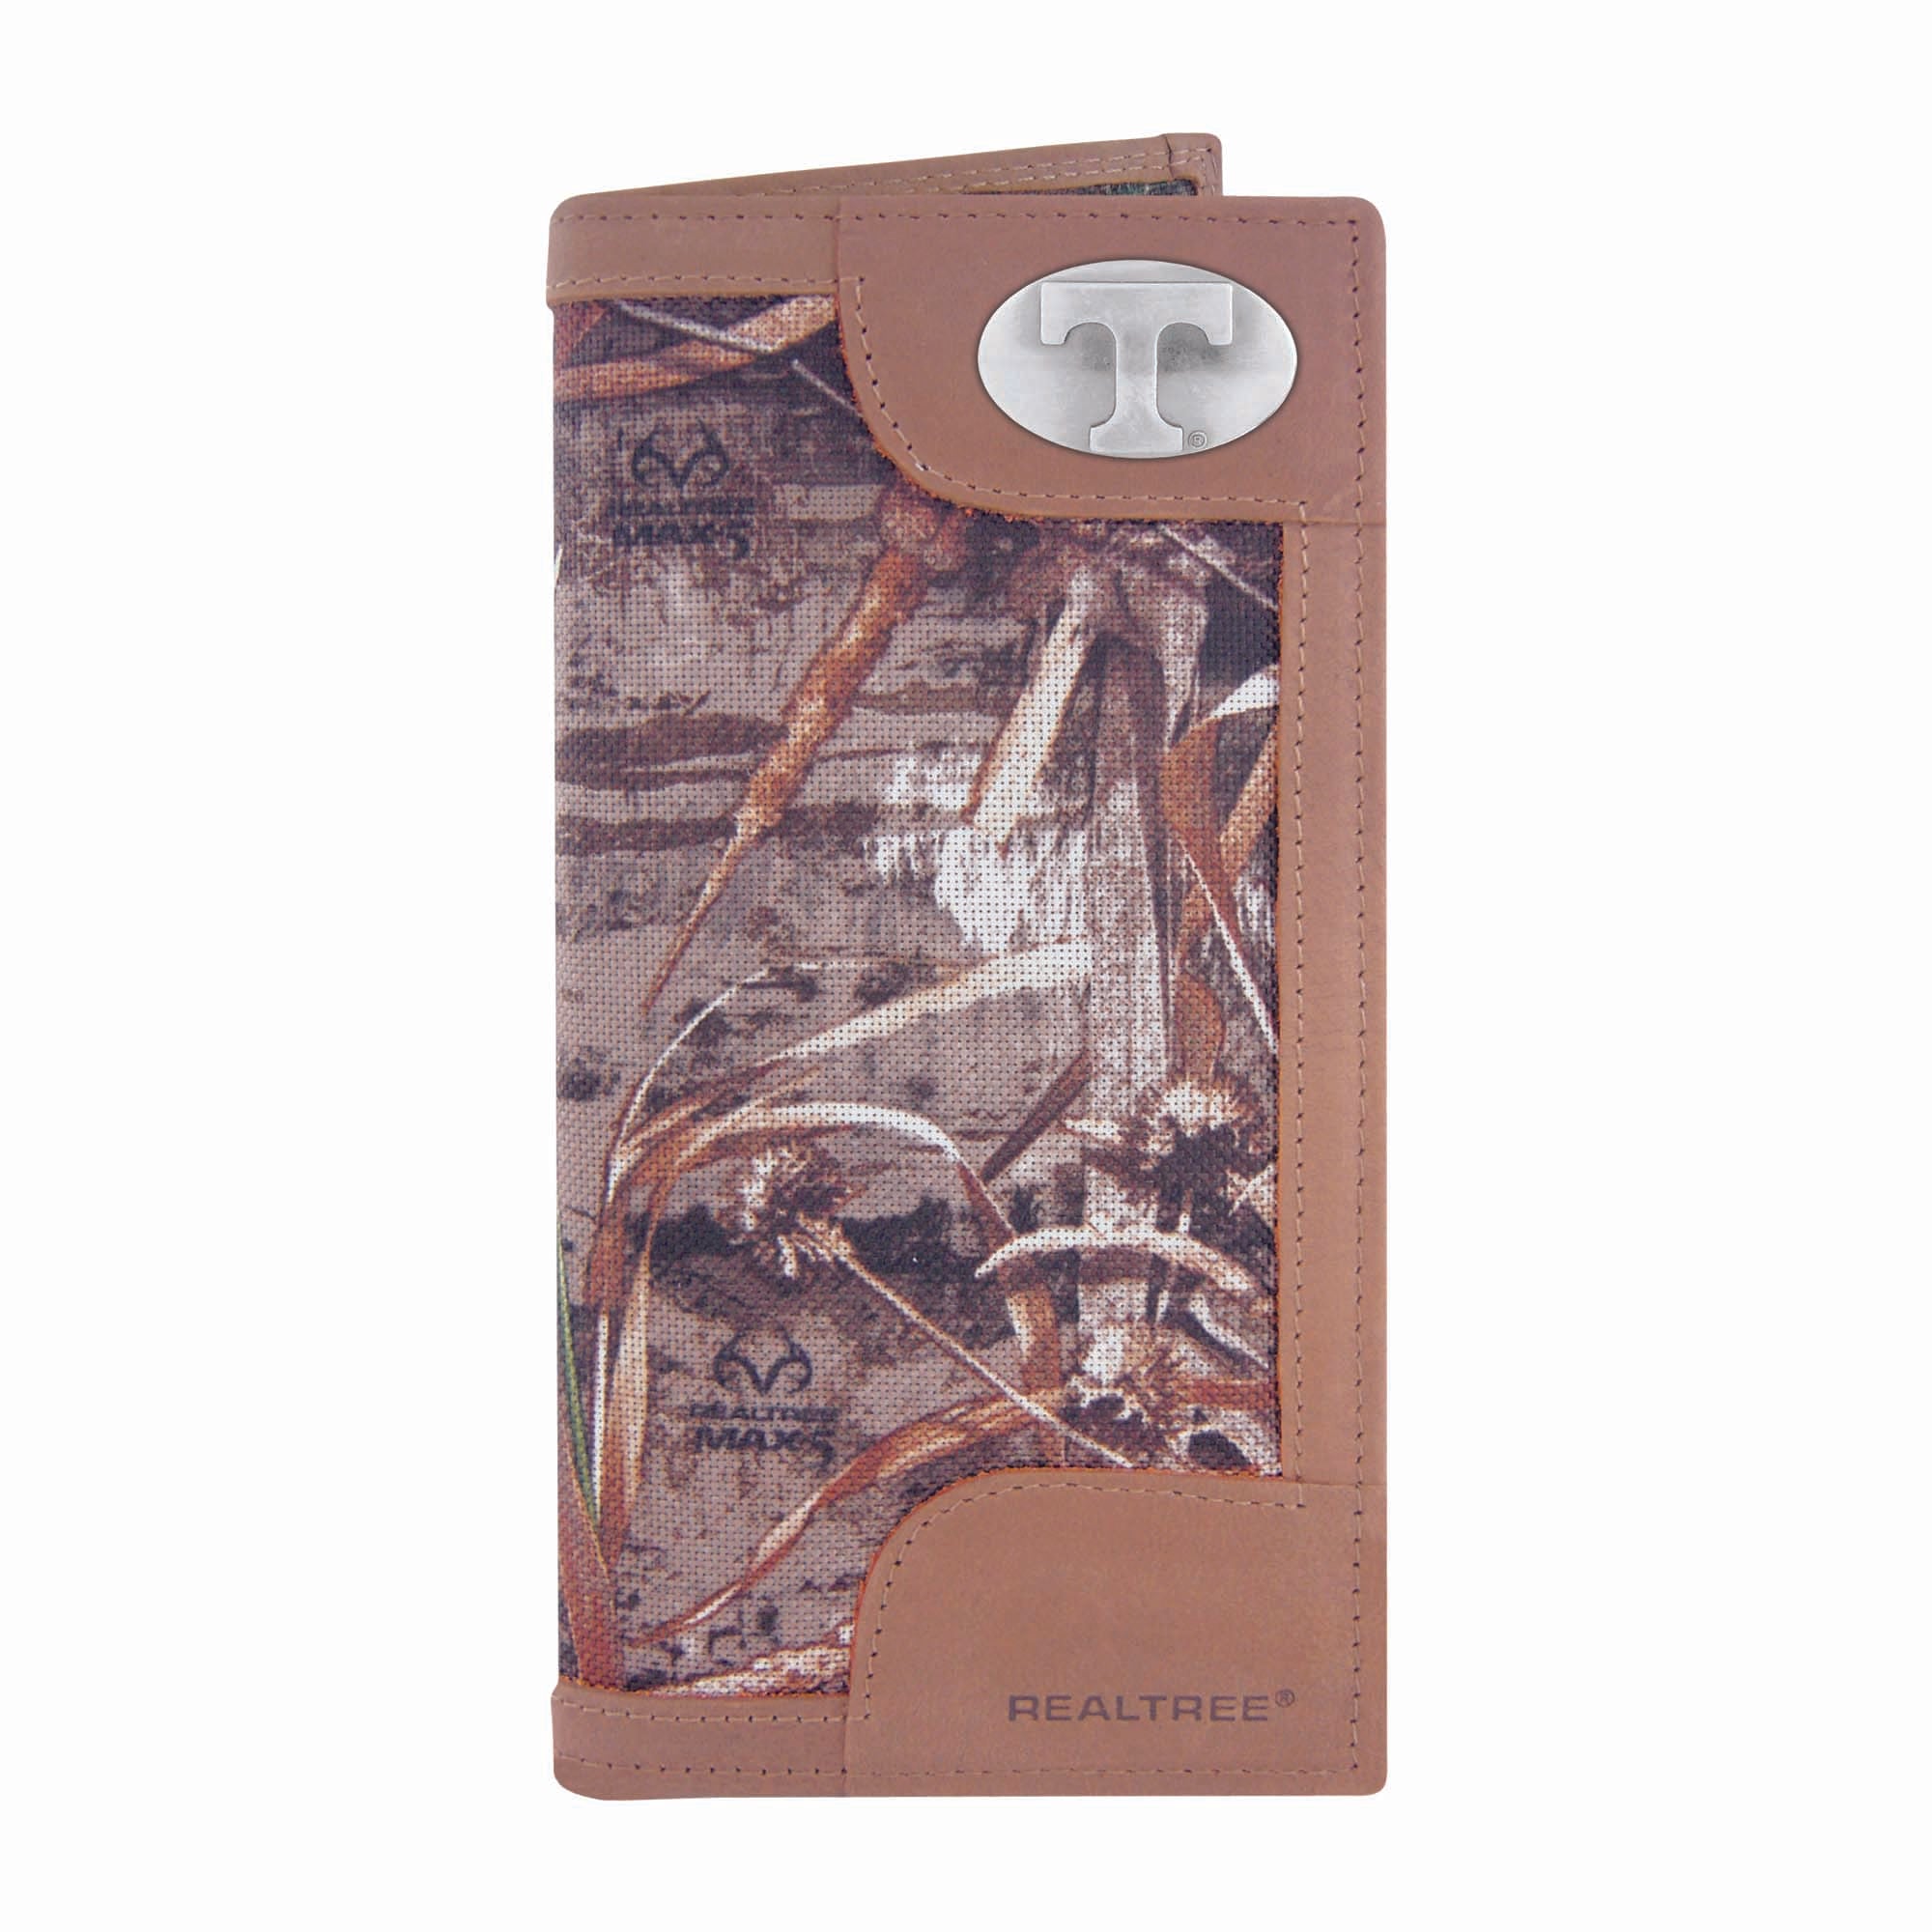 Tennessee Volunteers Realtree Max-5 Camo & Leather Roper Wallet w/ Concho - NCAA